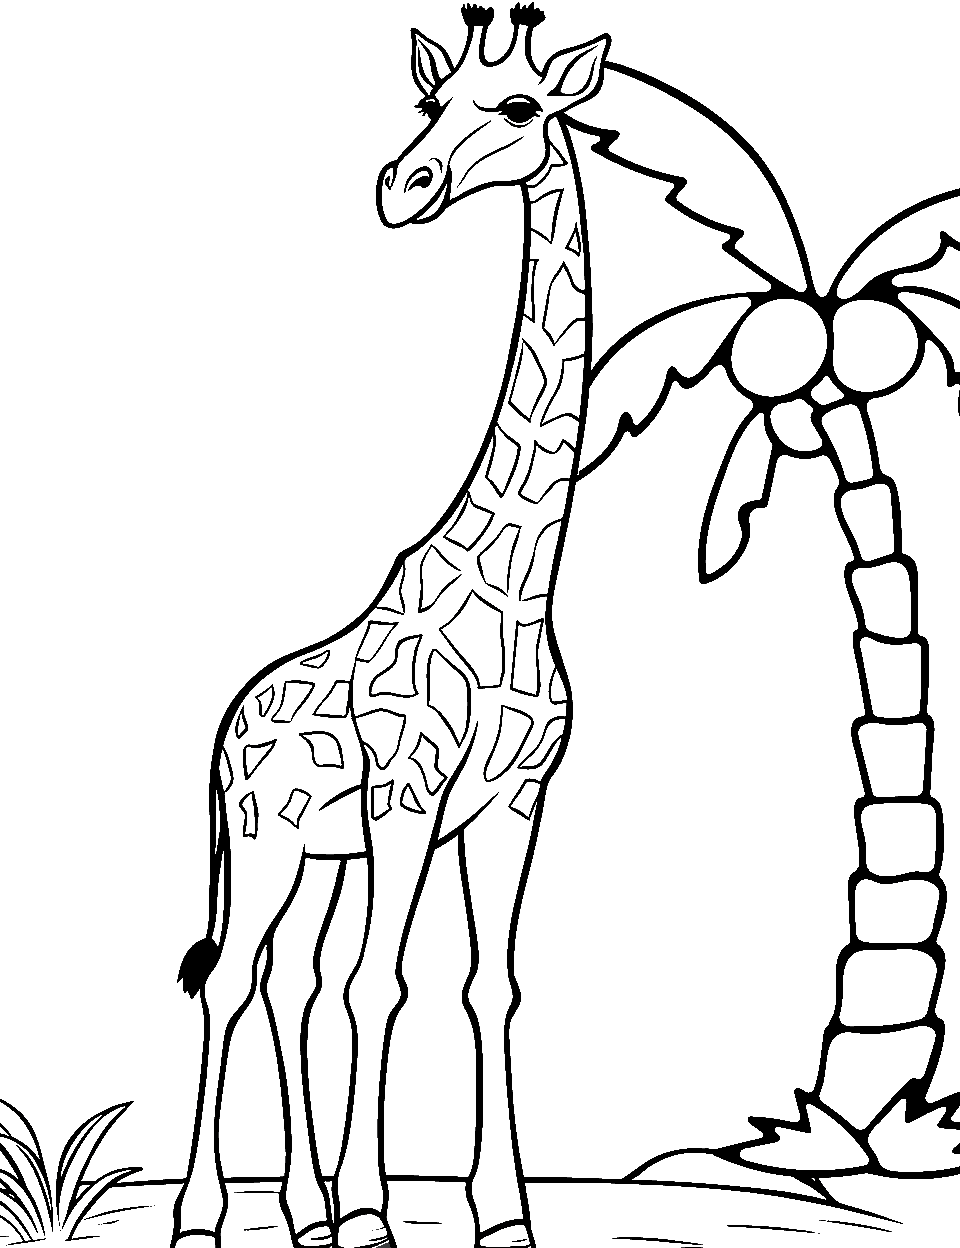 Giraffe's Tall Friend Coloring Page - A giraffe standing next to a towering palm tree, comparing heights.